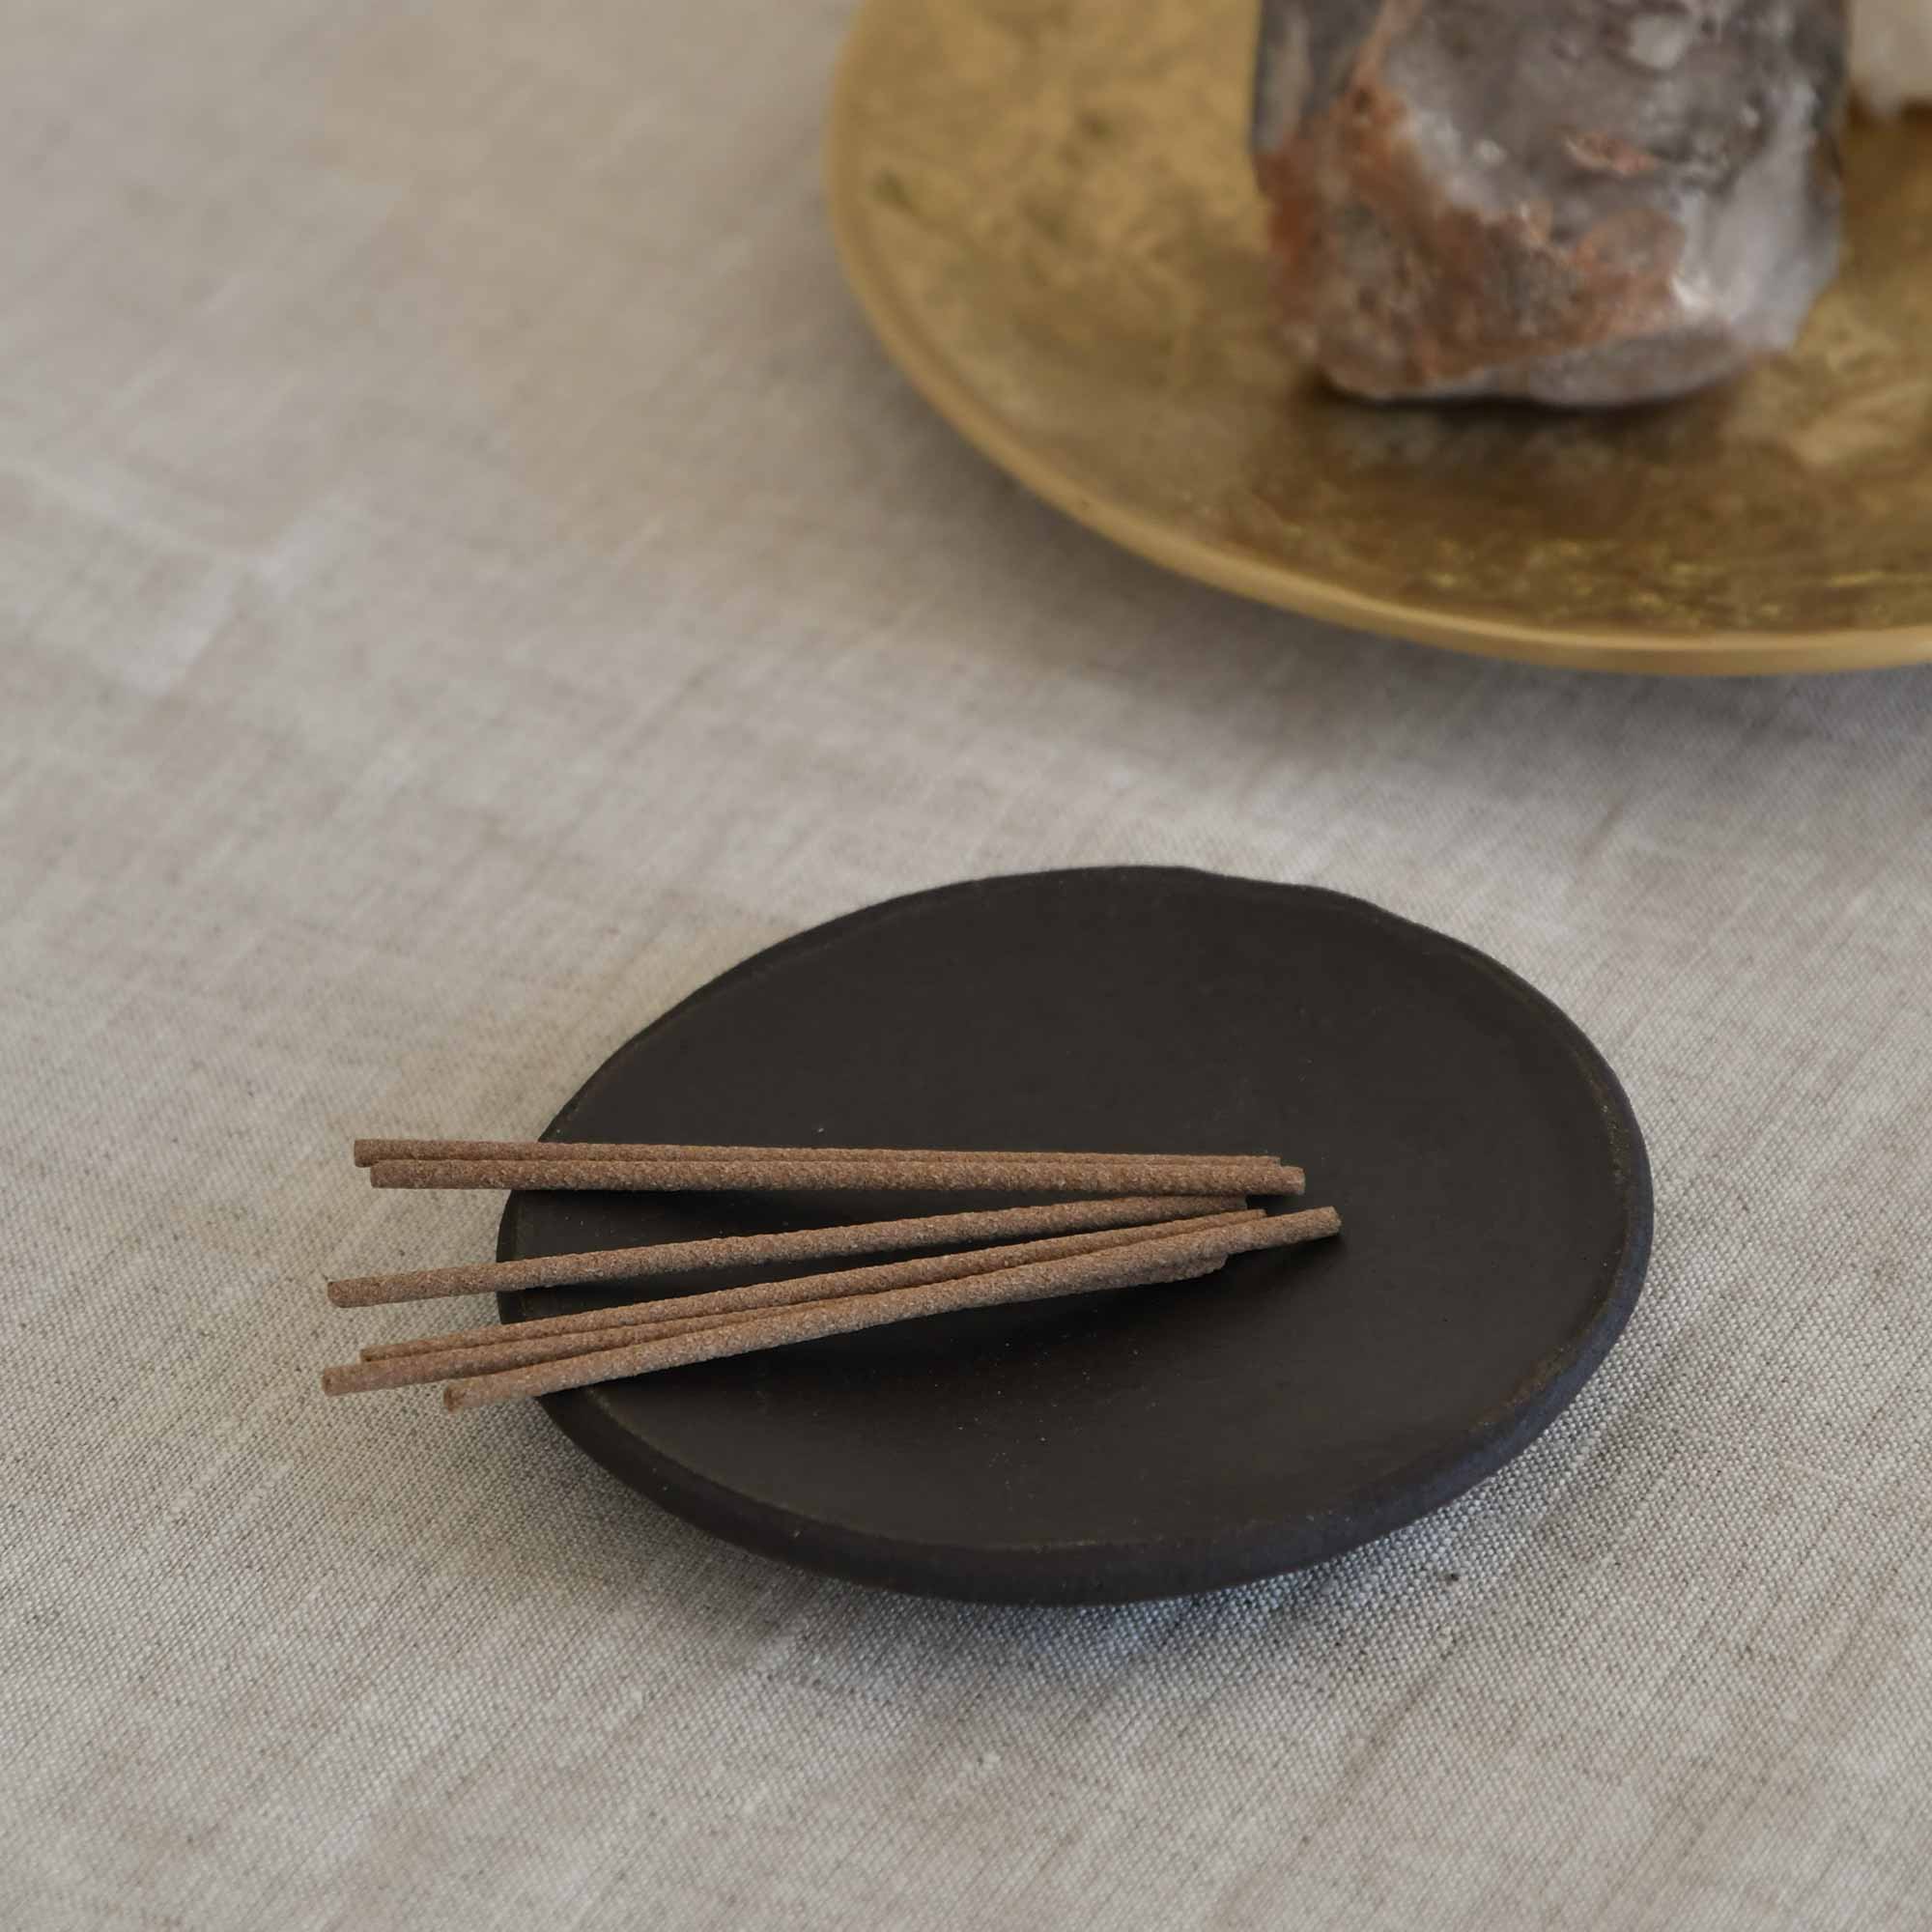 Placed several incense sticks on the ceramic plate